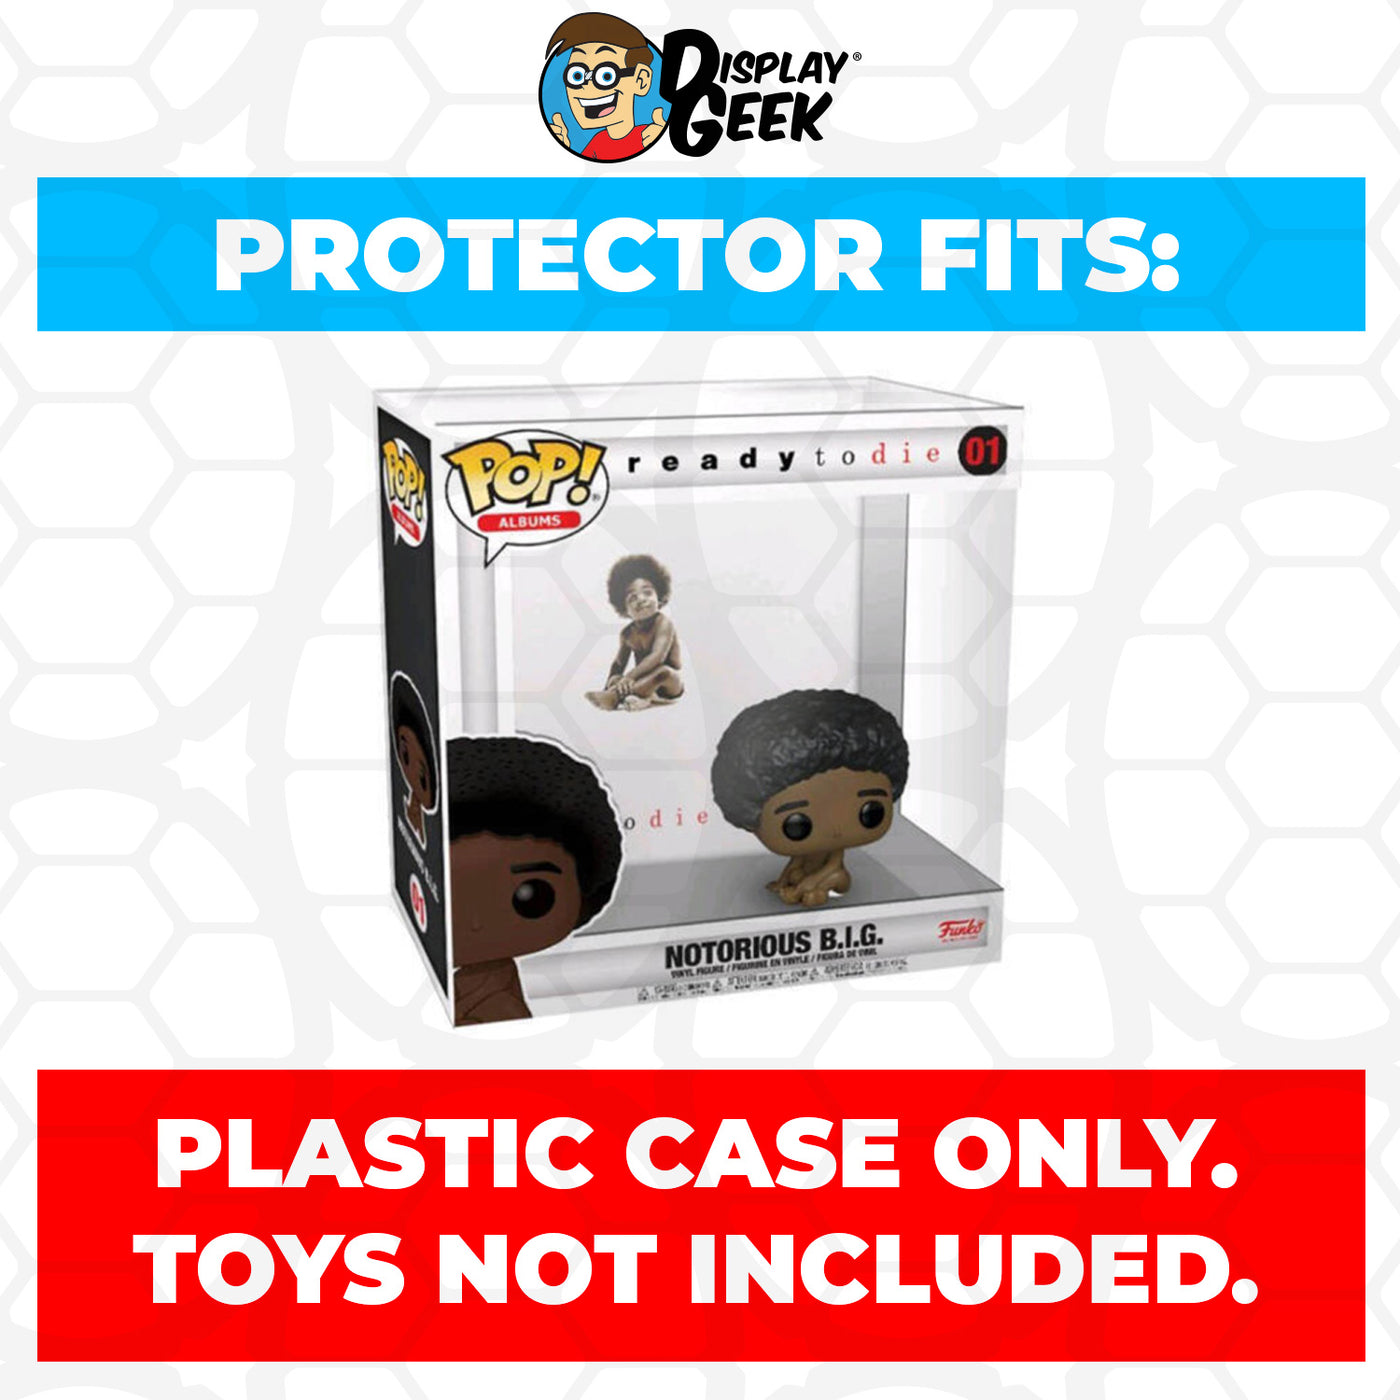 Pop Protector for Notorious BIG Ready to Die #01 Funko Pop Albums on The Protector Guide App by Display Geek